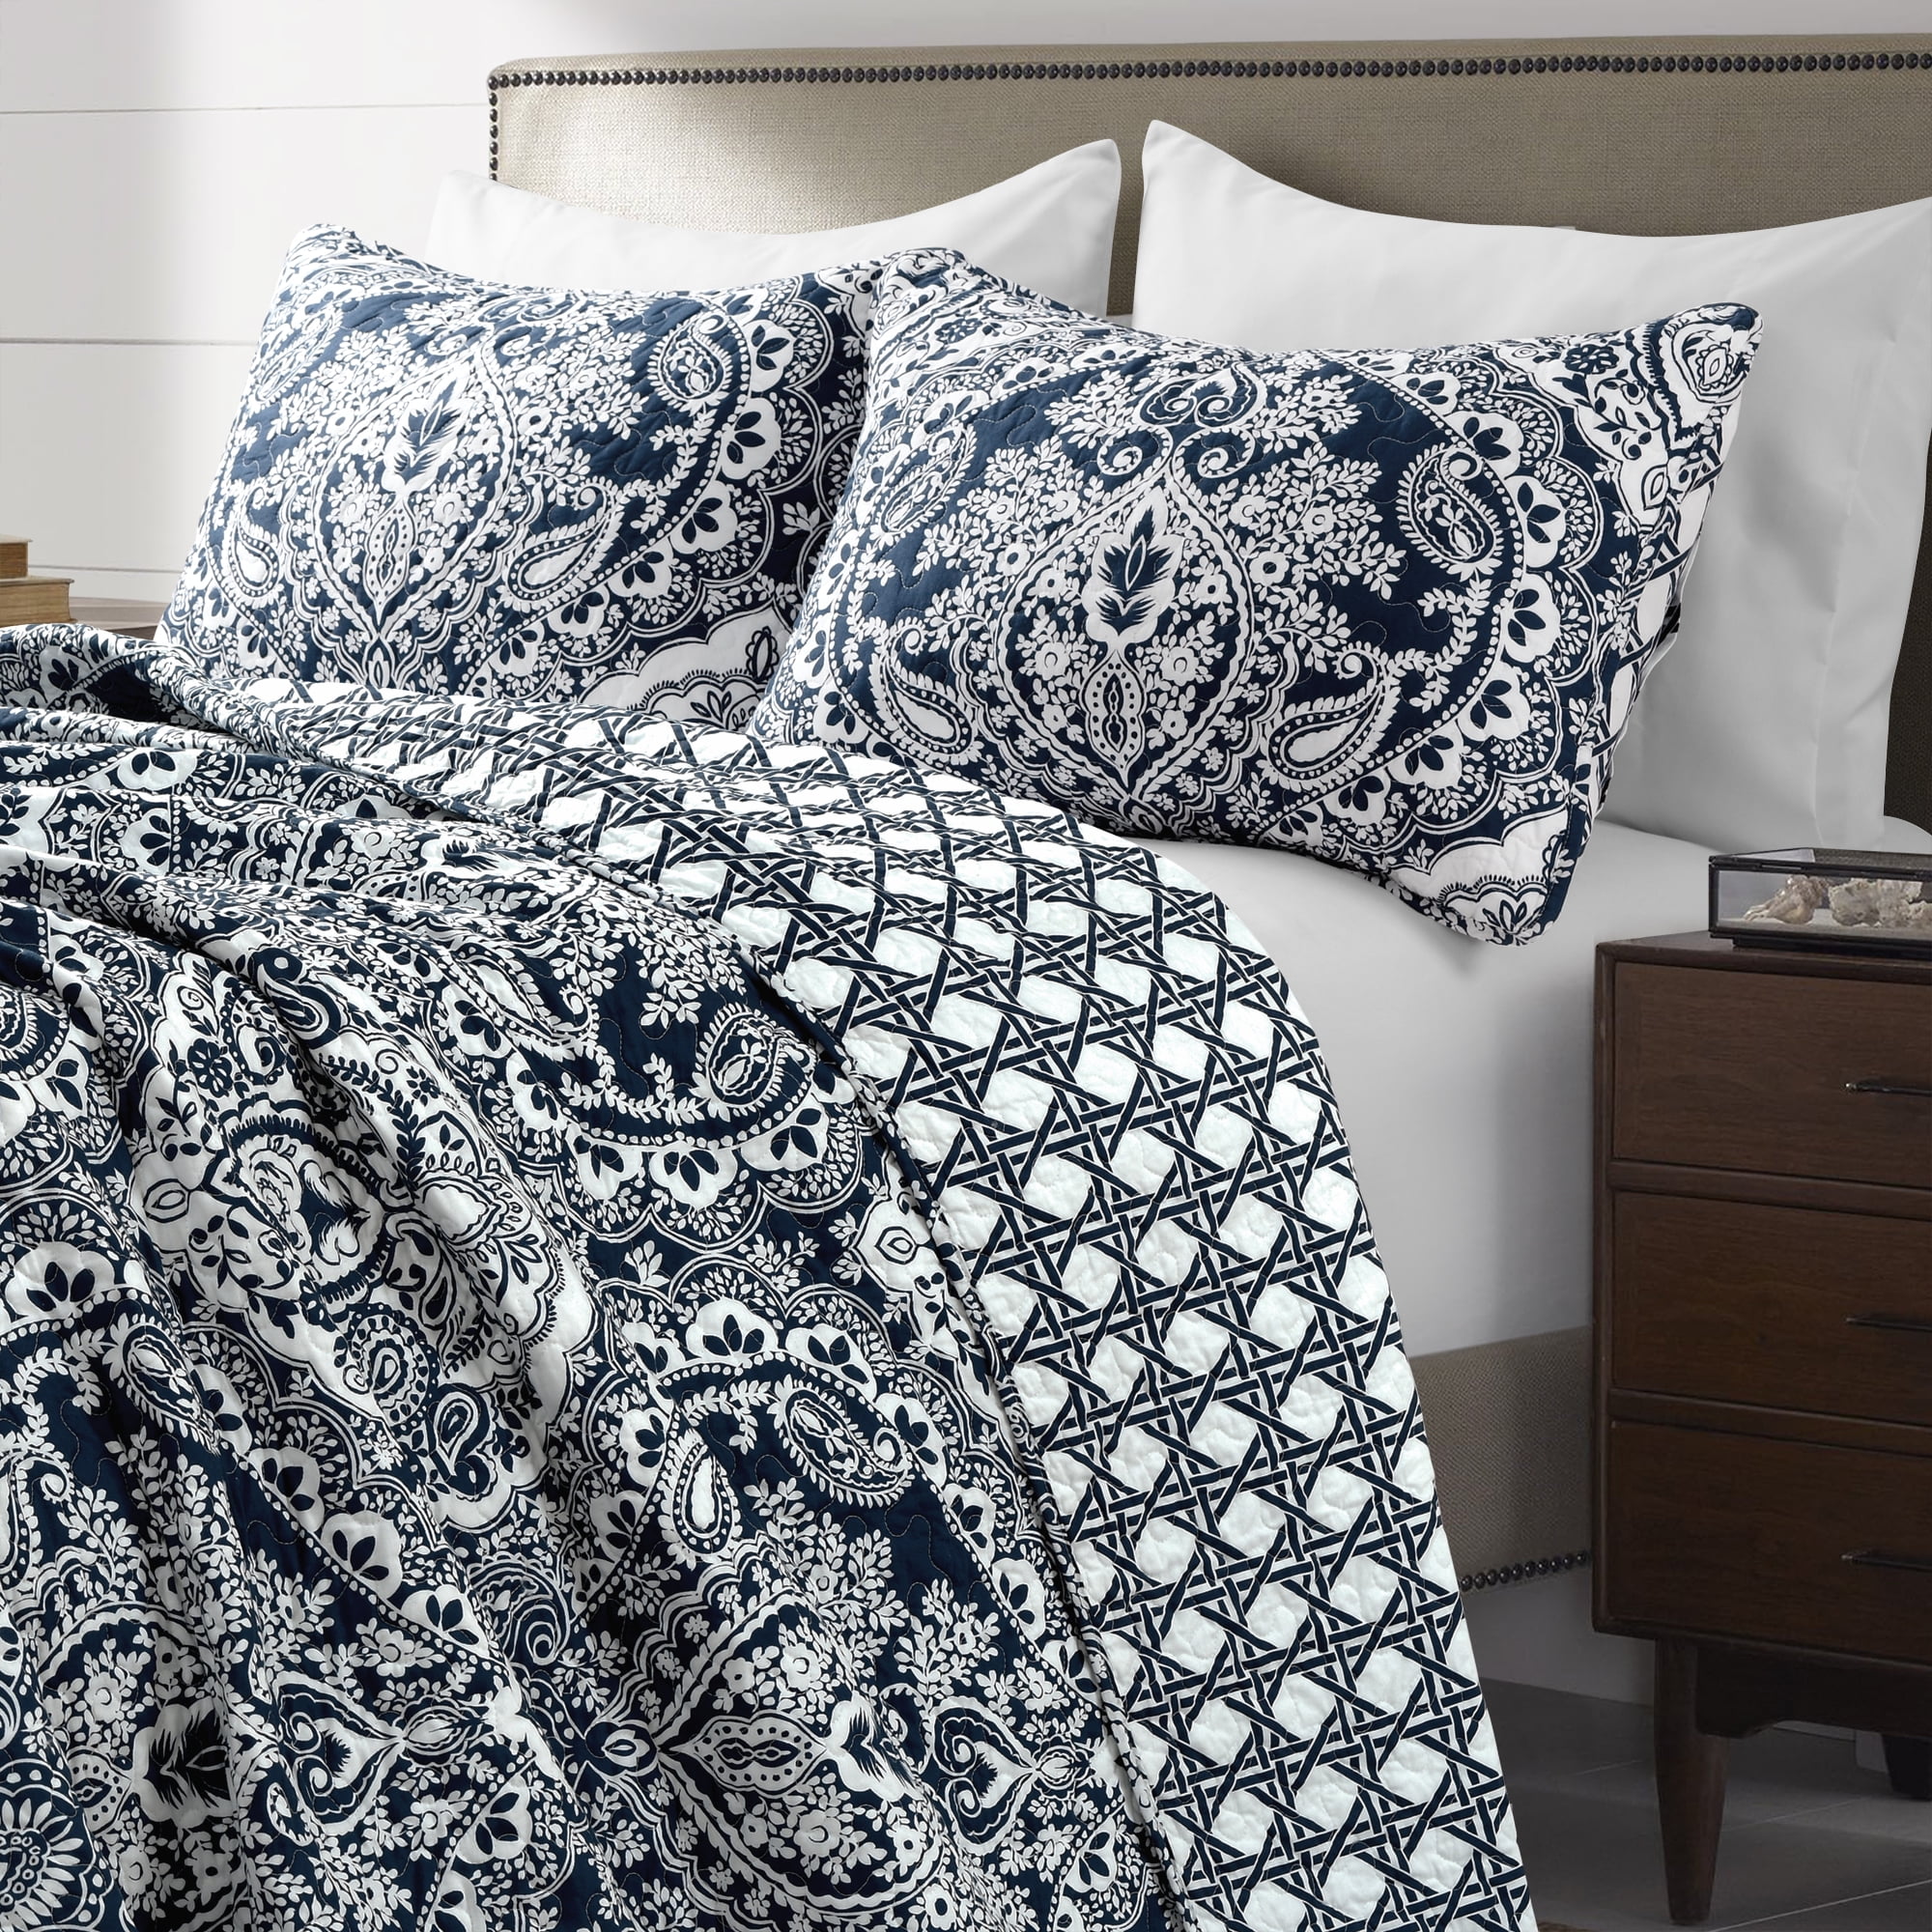 Coverlet Floral Navy & Light-Blue, Queen & Oversized Queen Bed Cover Lightweight & Hypoallergenic & Breathable Mellon Home Decor Hasiel 3 PC Microfiber Reversible Quilt Set as Bedspread